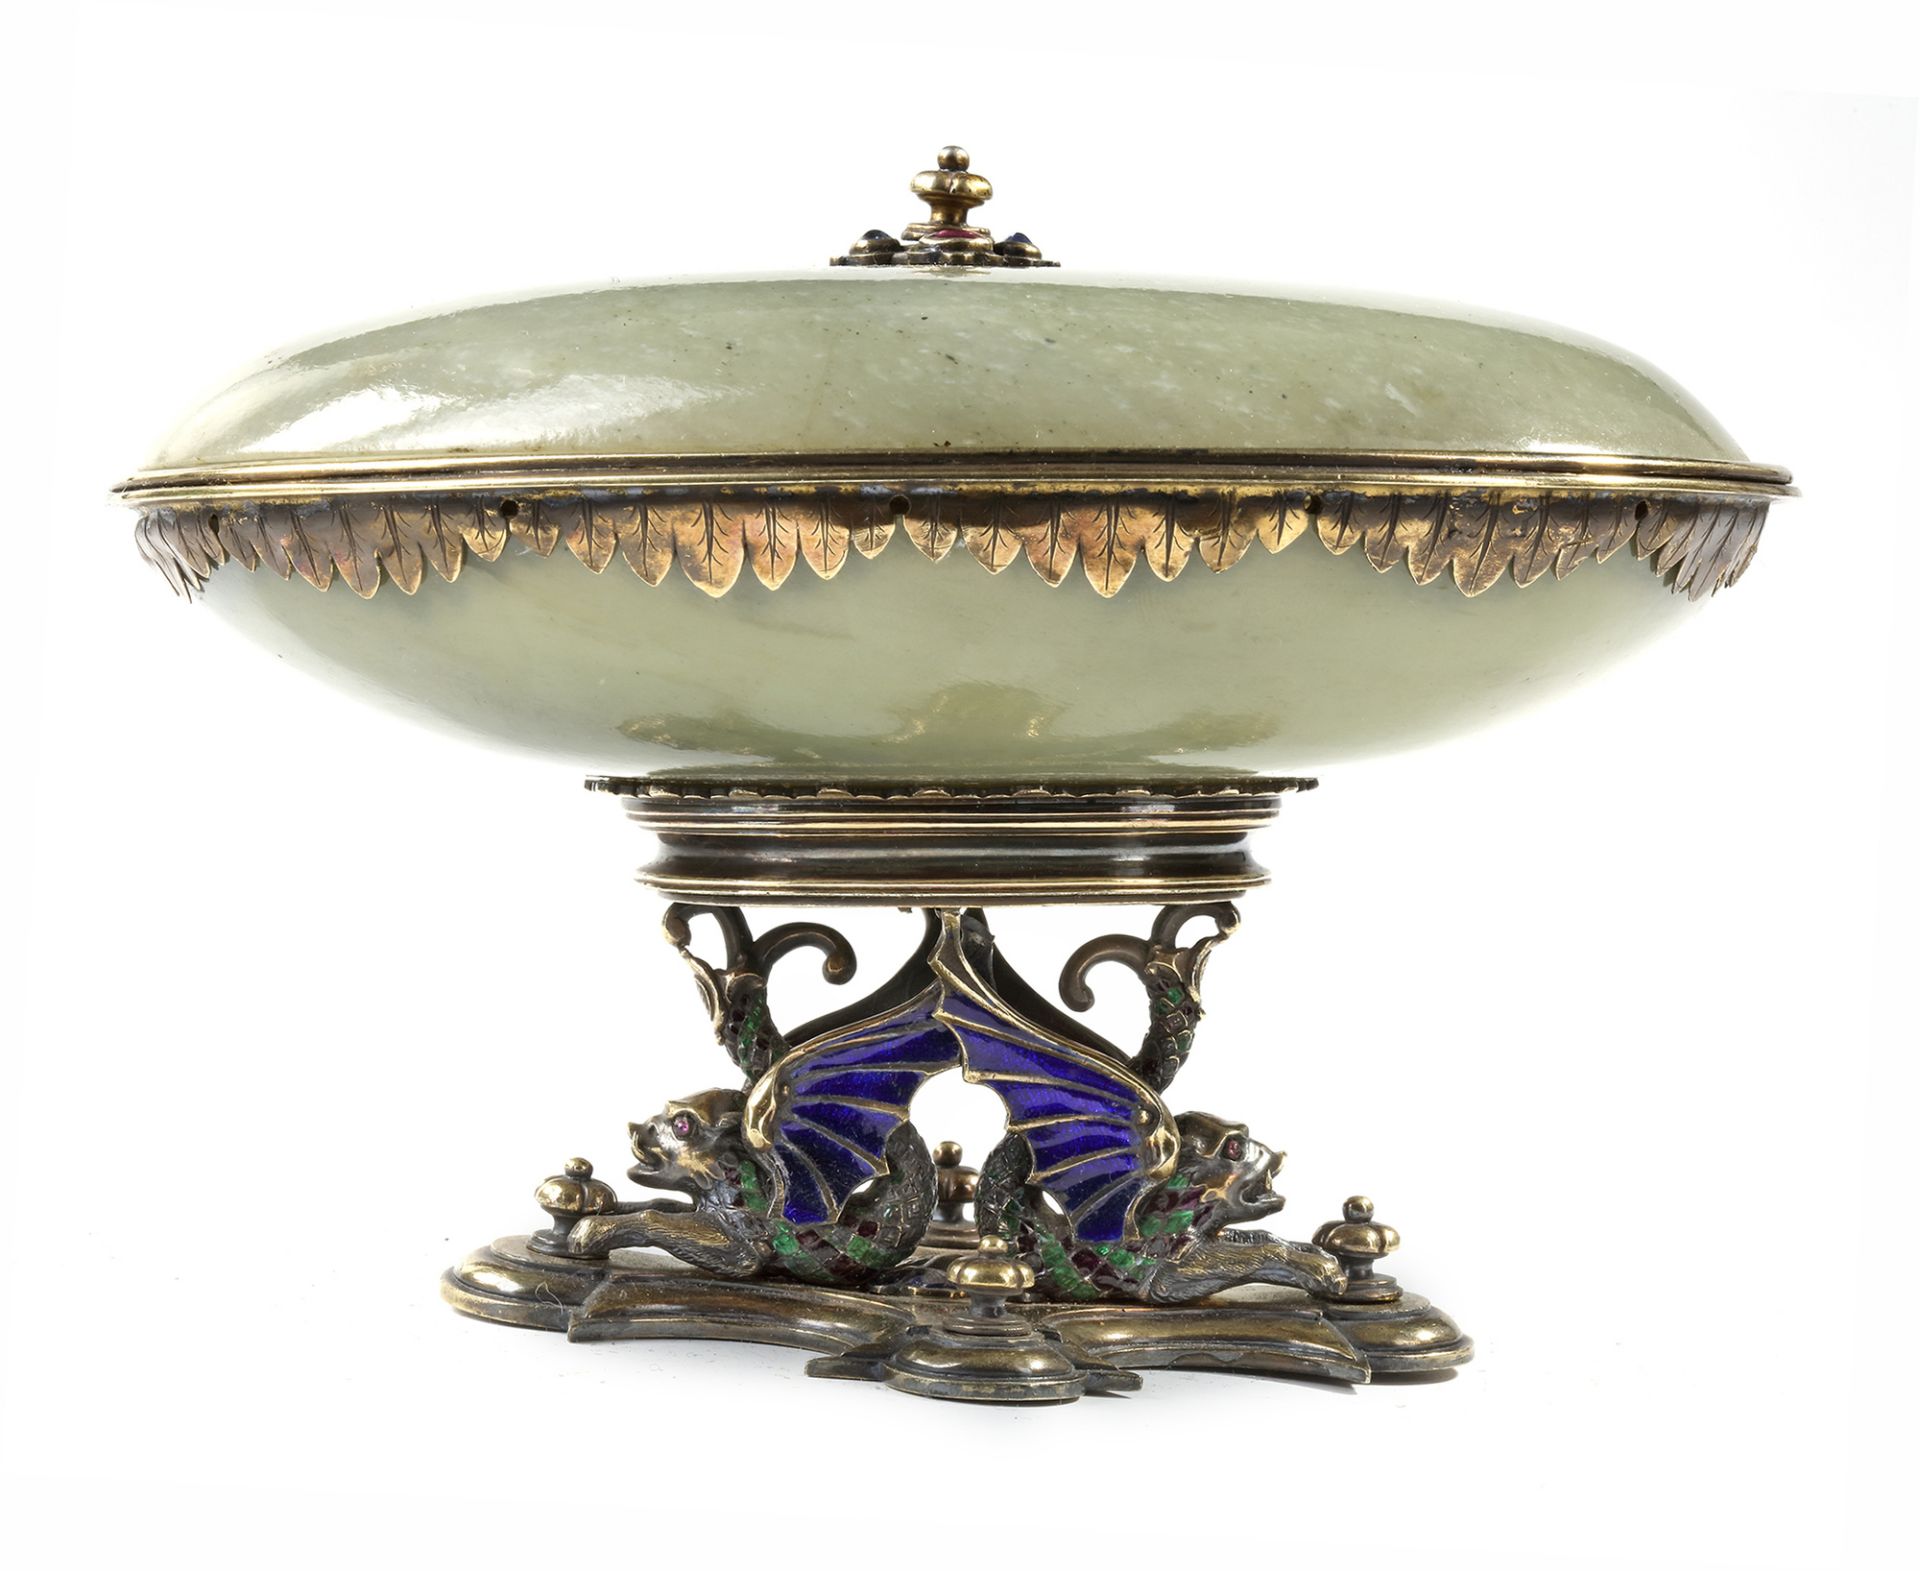 A MUGHAL JADE BOWL AND COVER, 18TH CENTURY